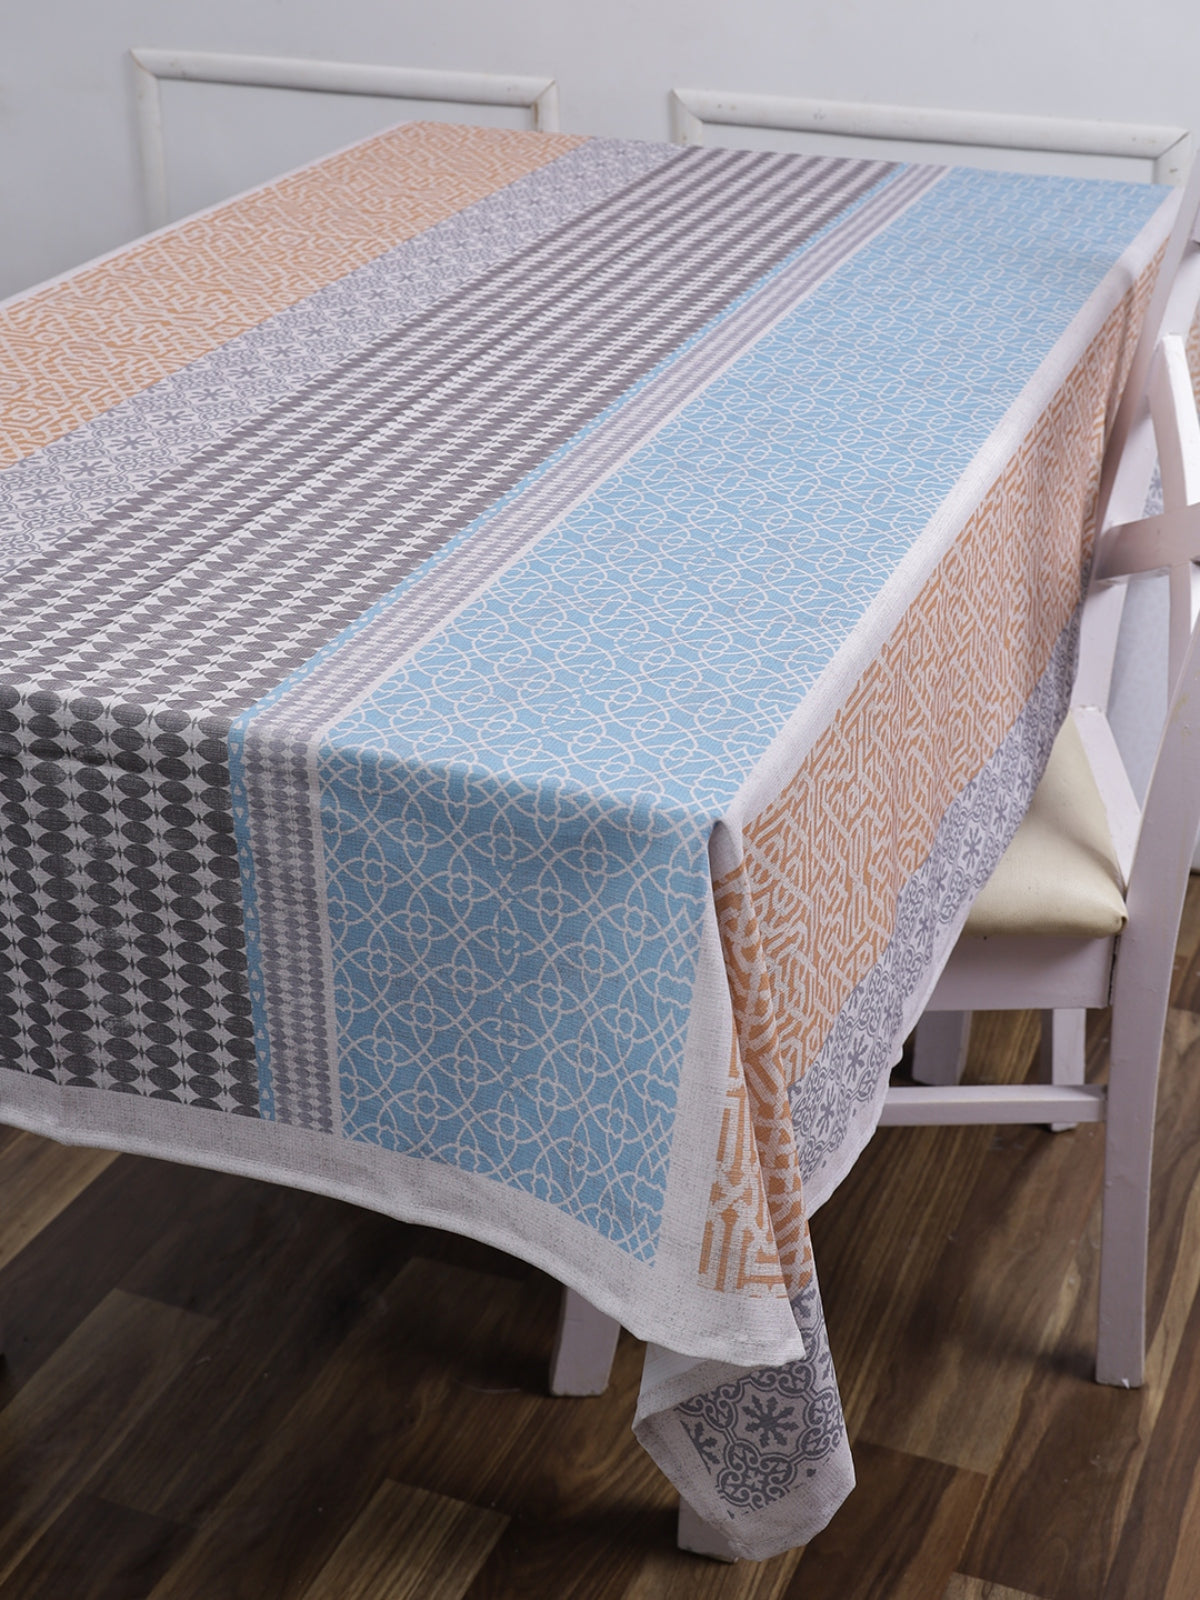 Polyester Geometric Printed Dining Table Cover Cloth 60x90 Inch - Multicolor